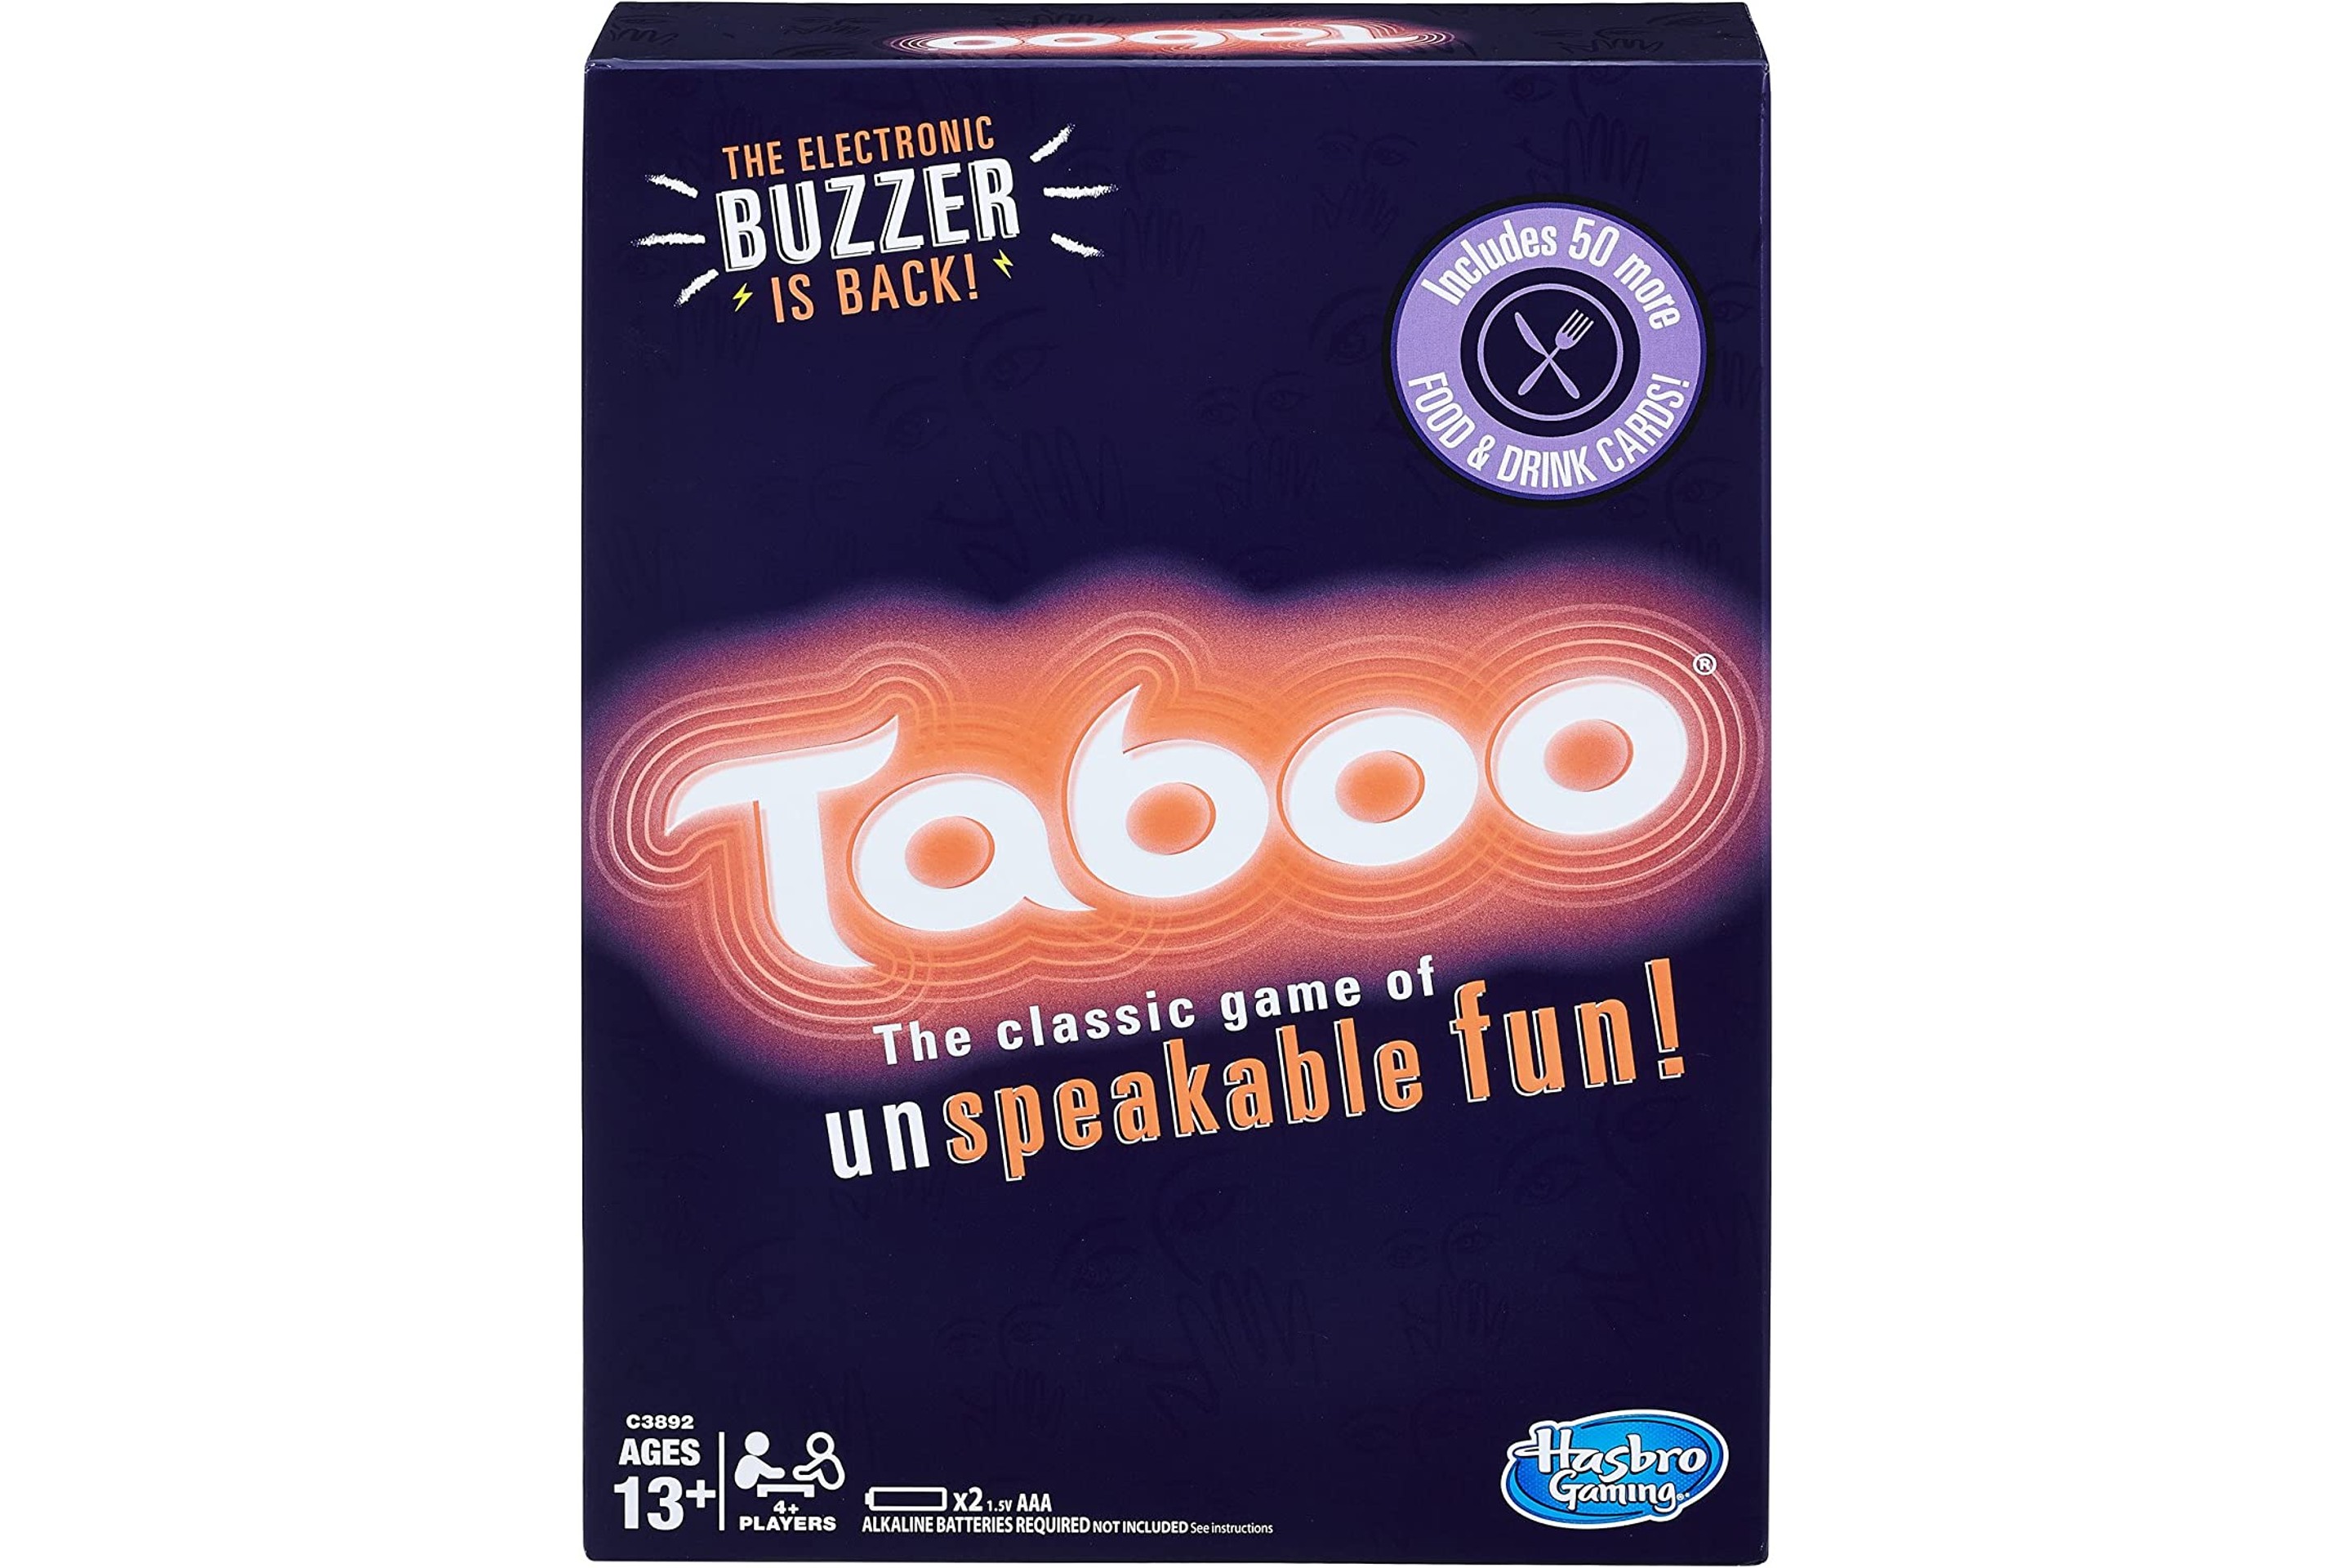 Hasbro Gaming Taboo Party Board Game with Buzzer